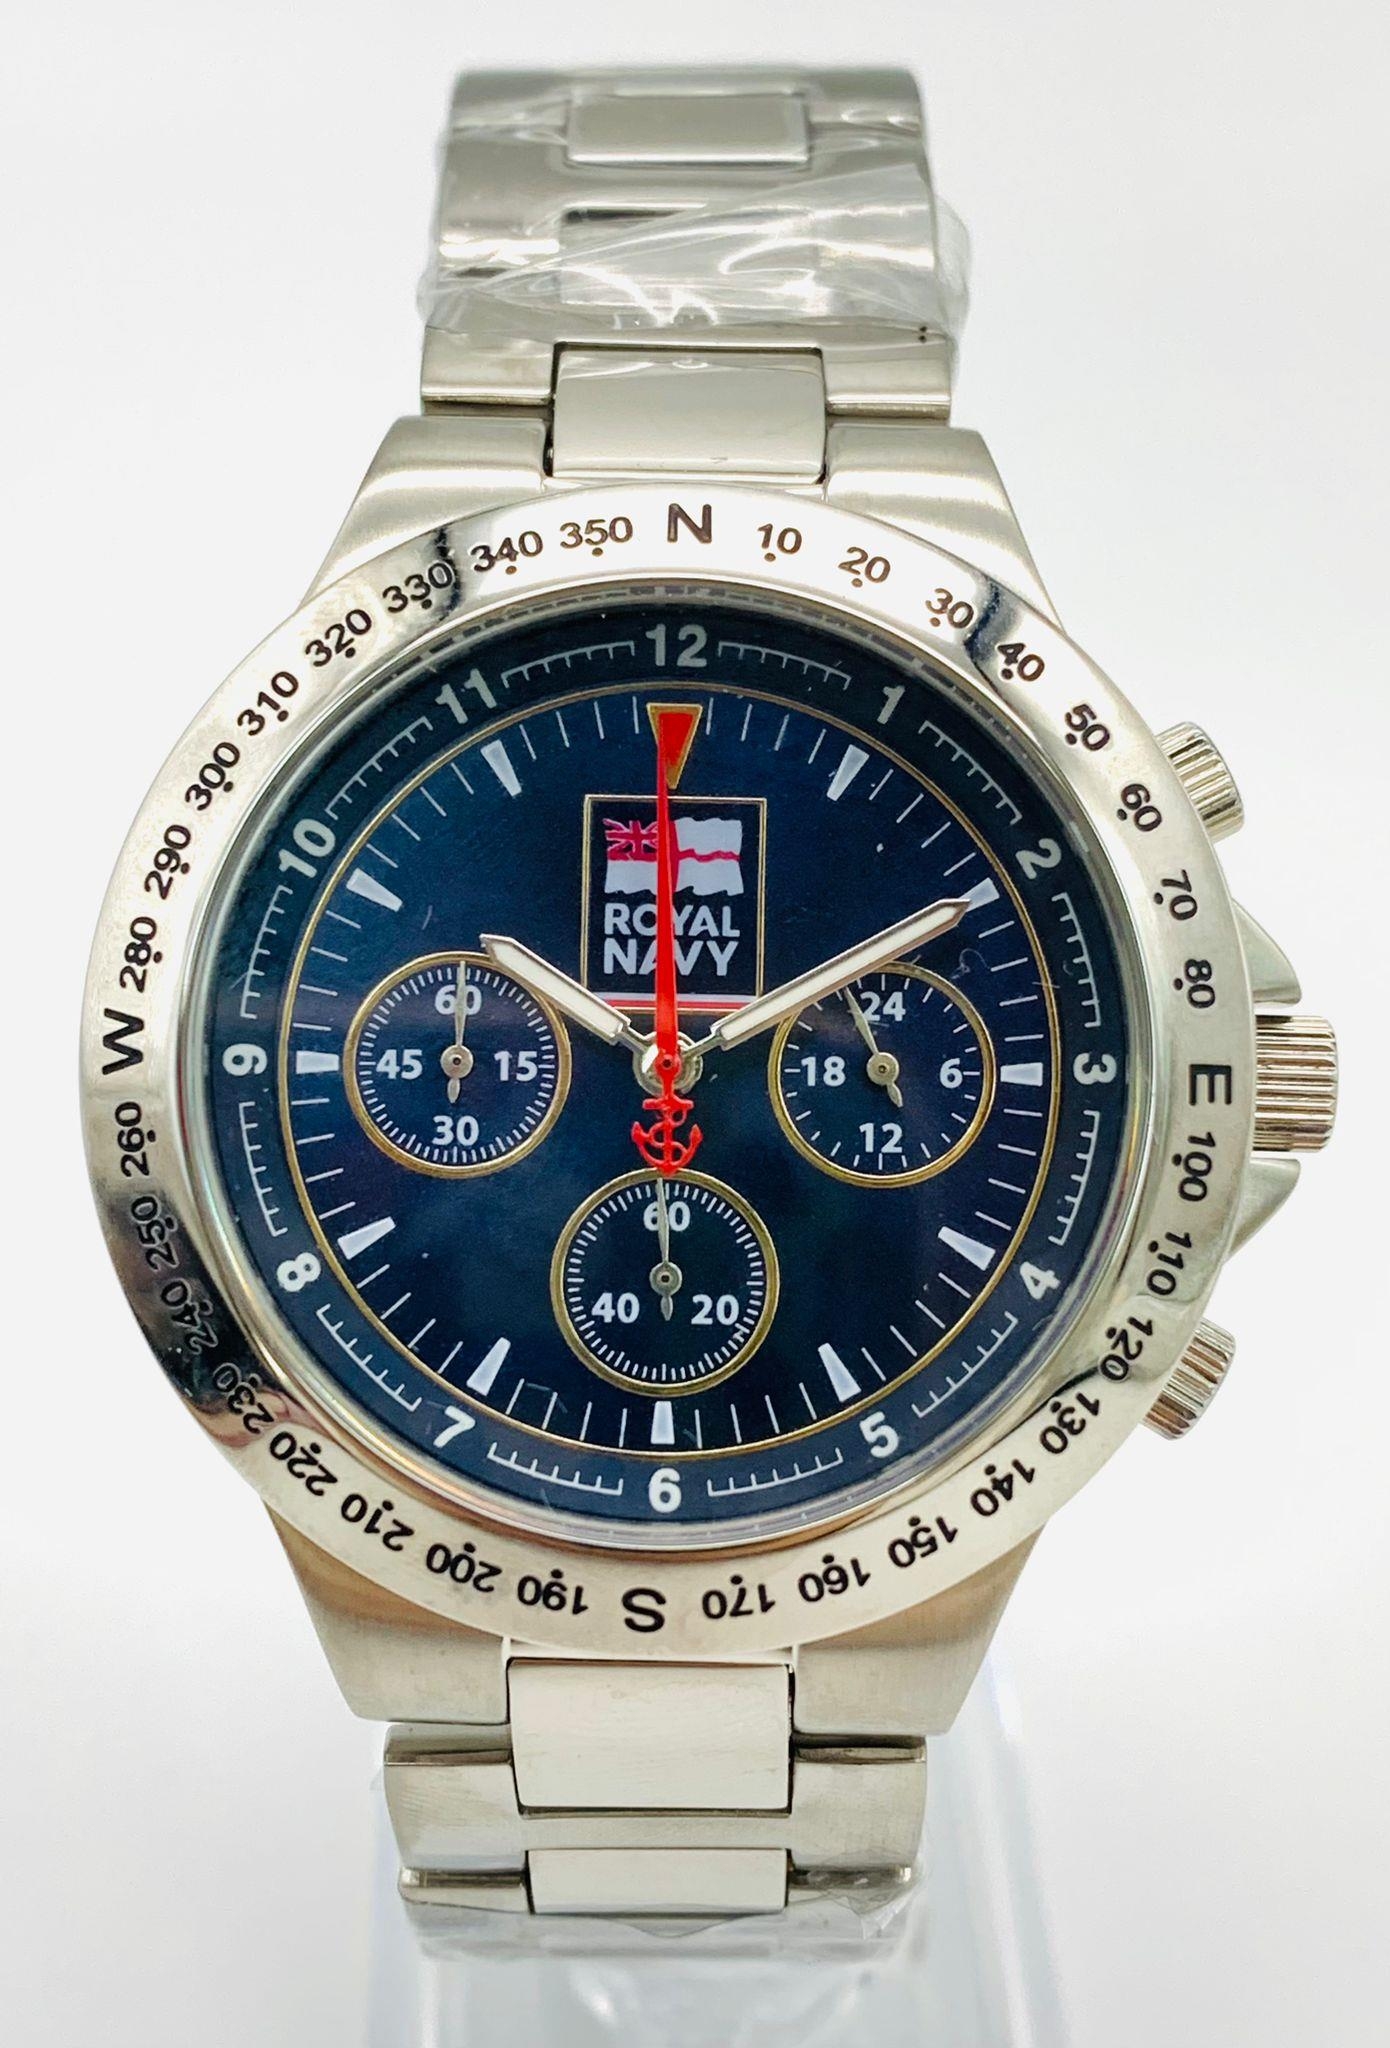 Unworn Limited Edition ‘Sovereign on the Seas’ Royal Navy Chronograph Watch, still in Original Box